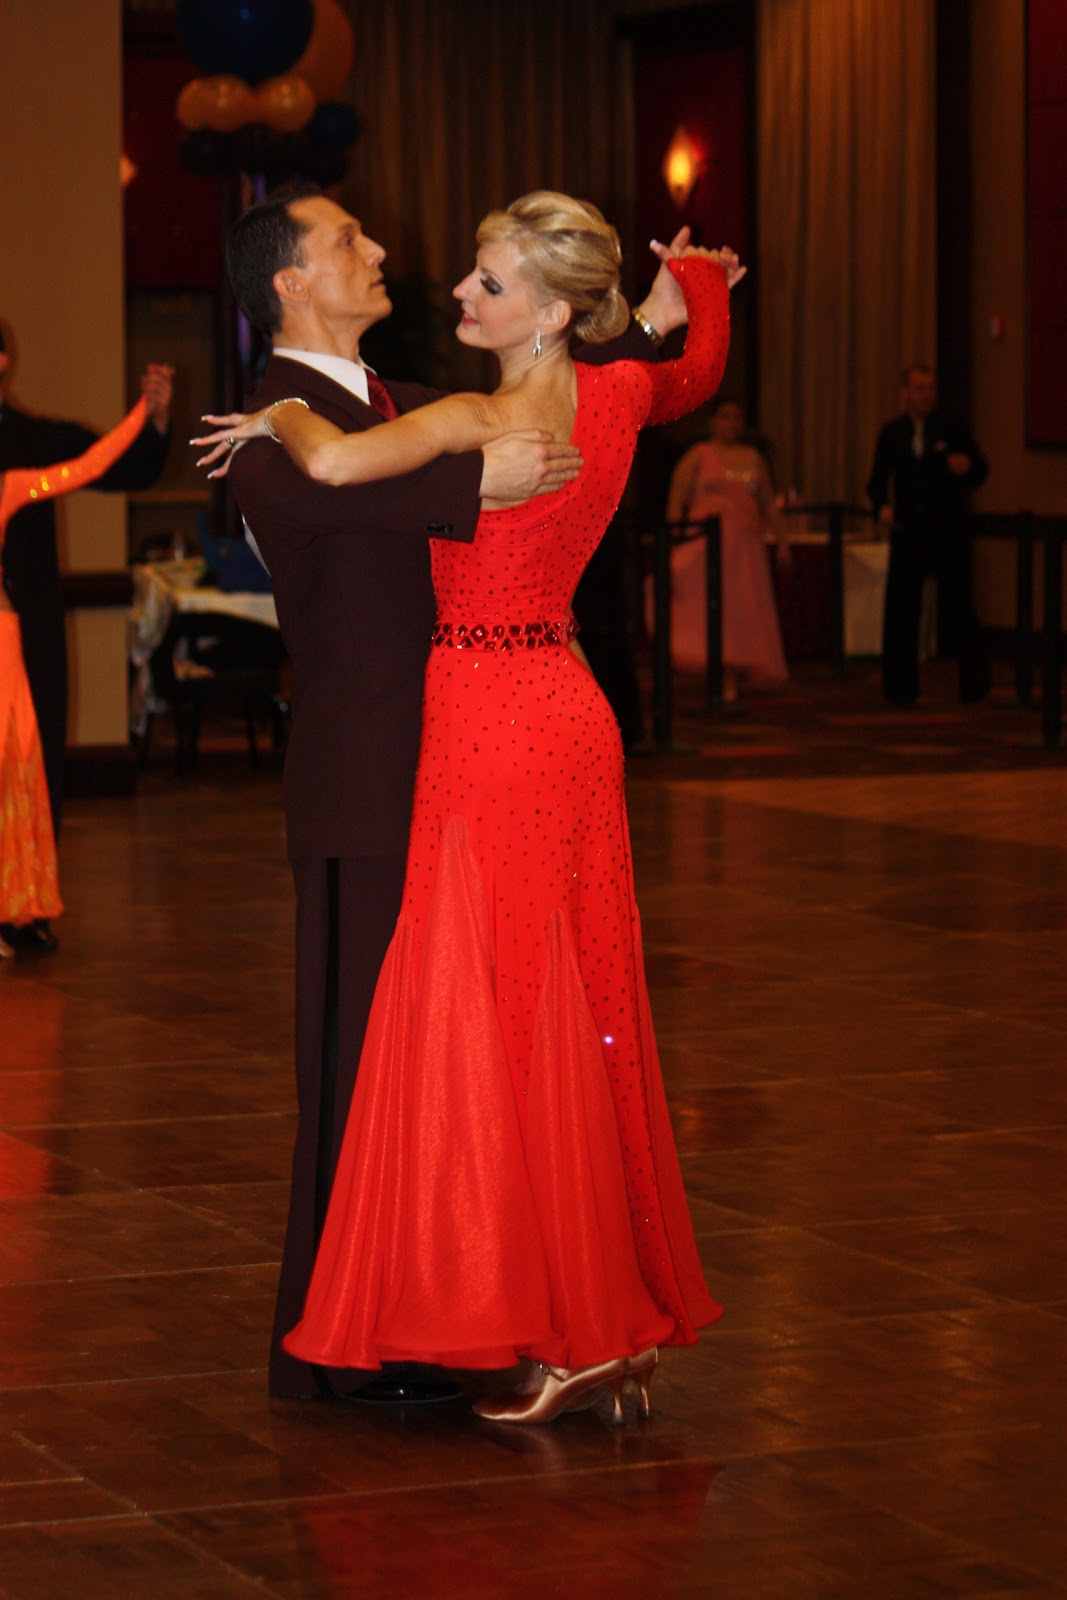 Why Compete Ballroom Dancing? Studio News at Fred